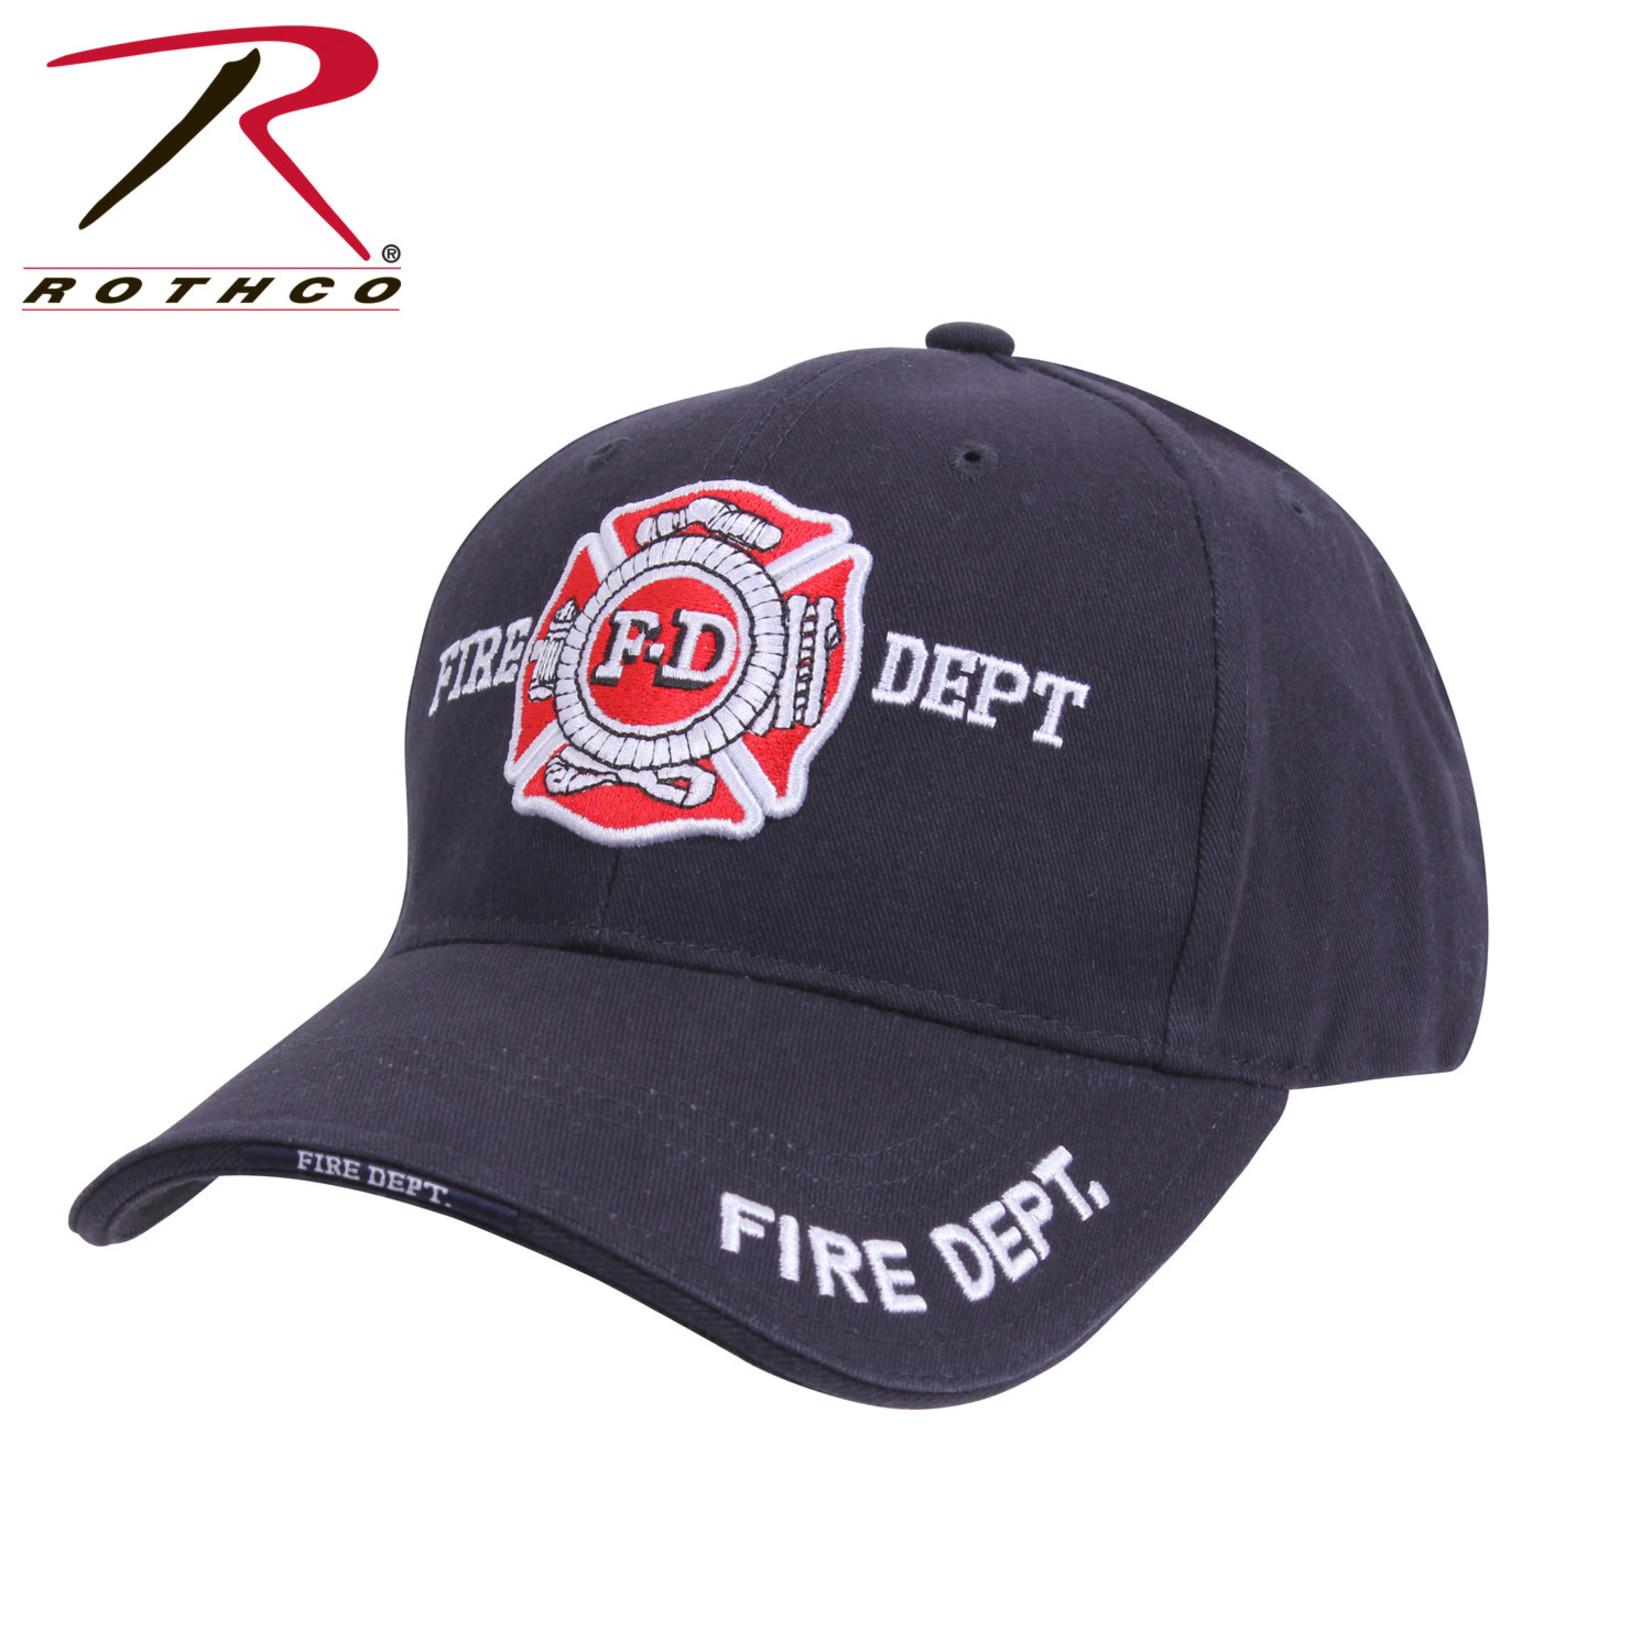 Rothco Rothco Fire Dept. Low Profile Cap - Navy Blue